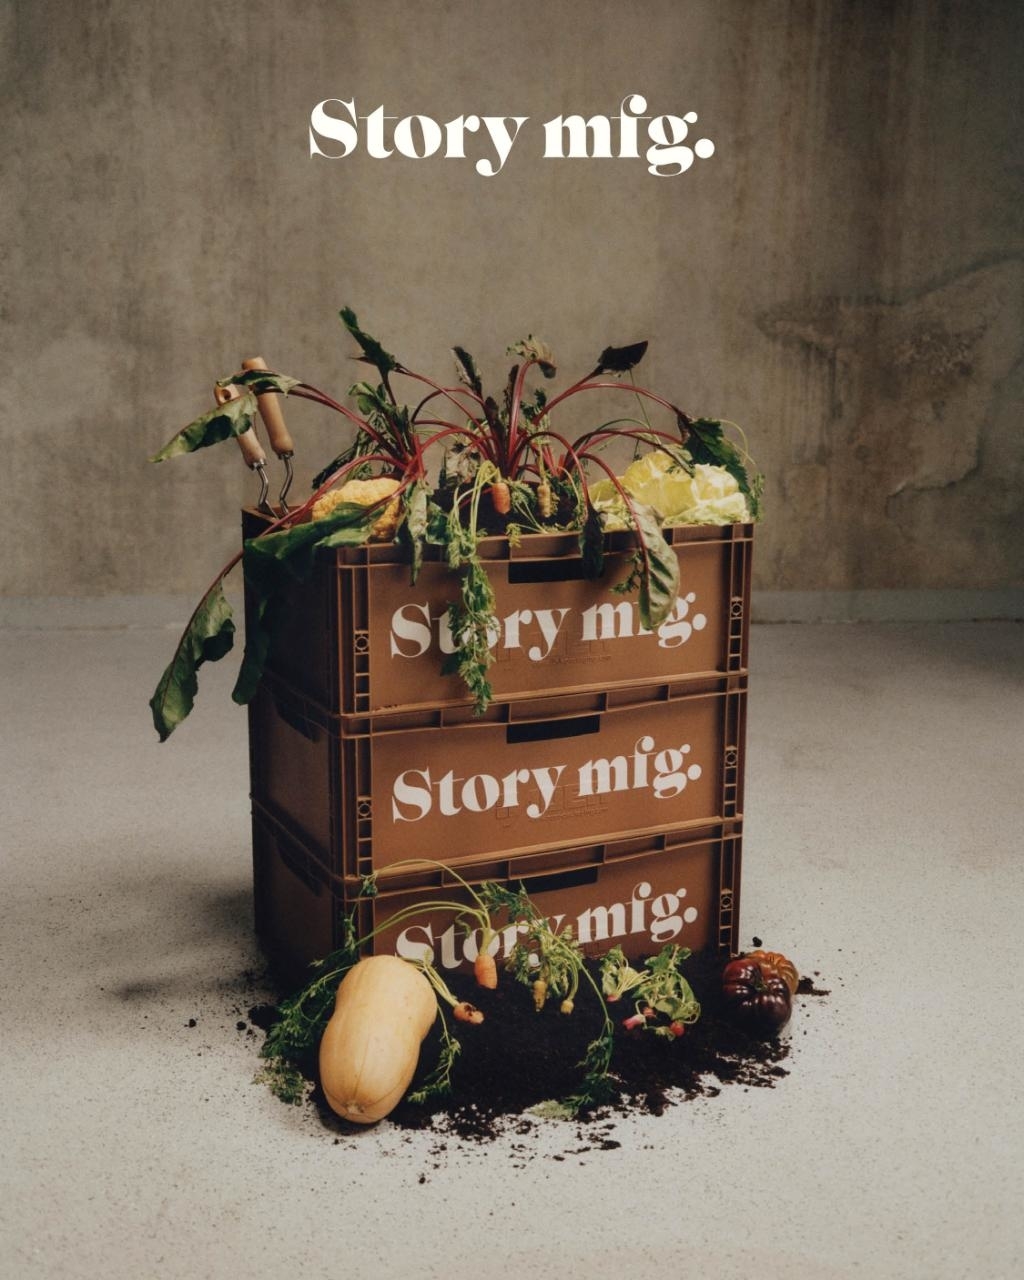 Assorted vegetables spilling out from a stack of wooden crates with &quot;Story mfg.&quot; text overlay